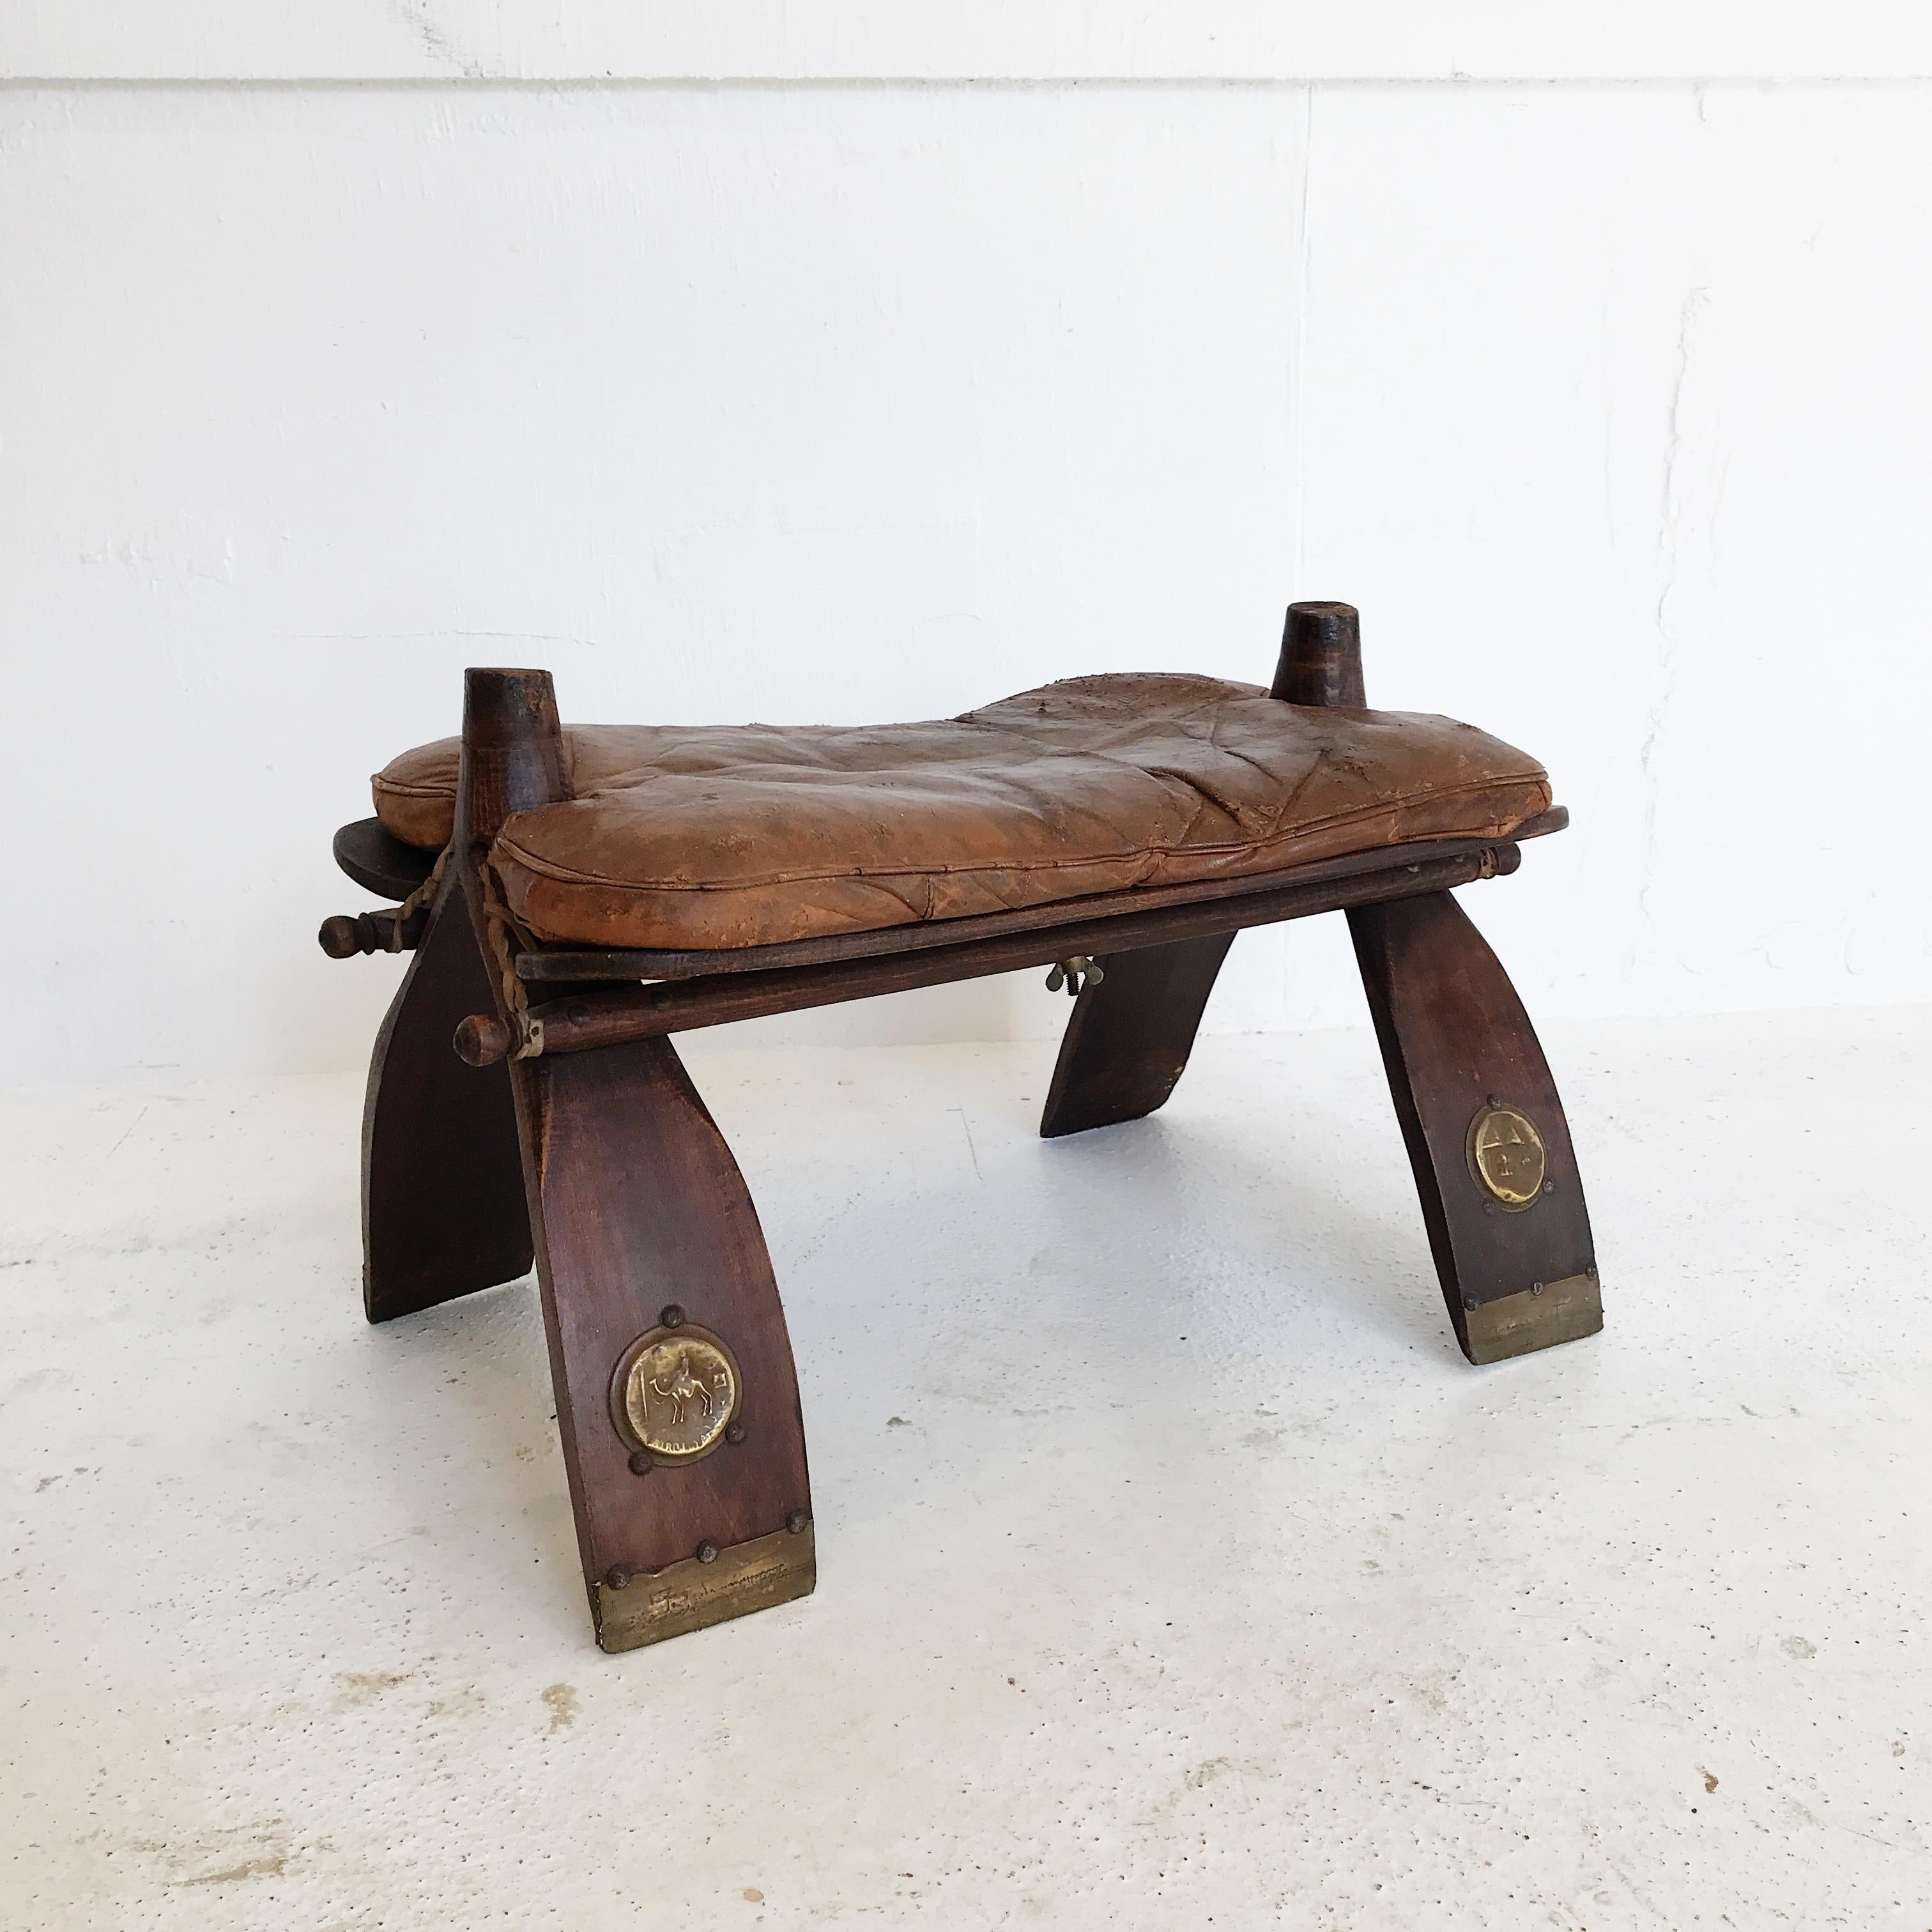 Mid-20th Century Egyptian Wooden Camel Saddle Stool with Original Leather Saddle For Sale 8